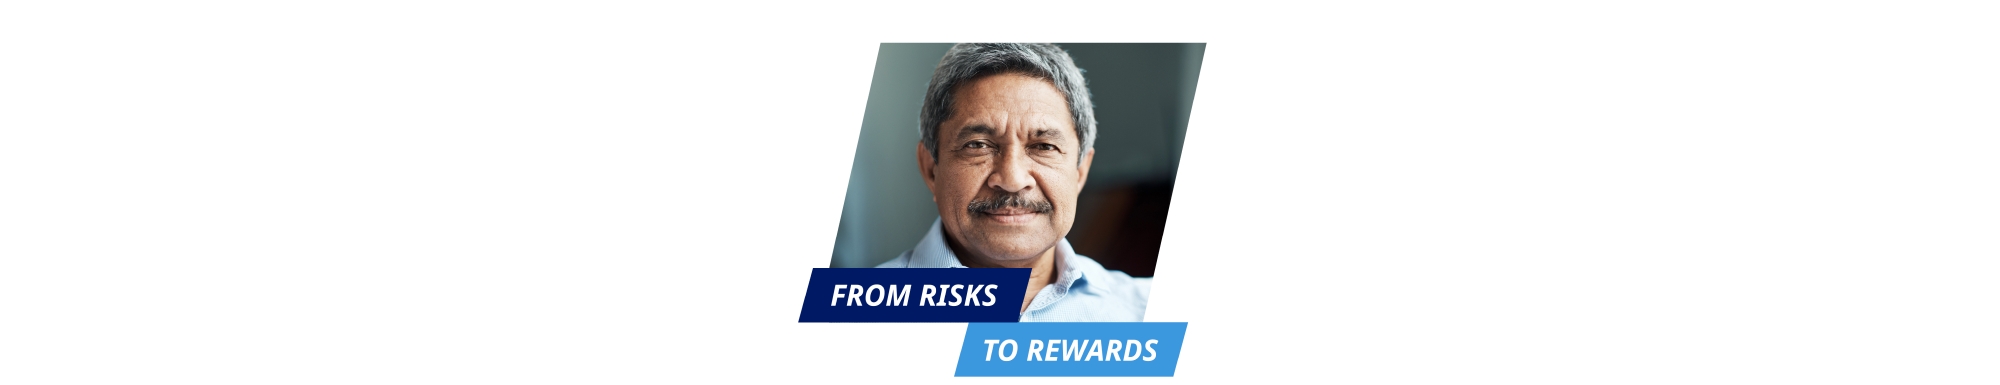 From risks to rewards